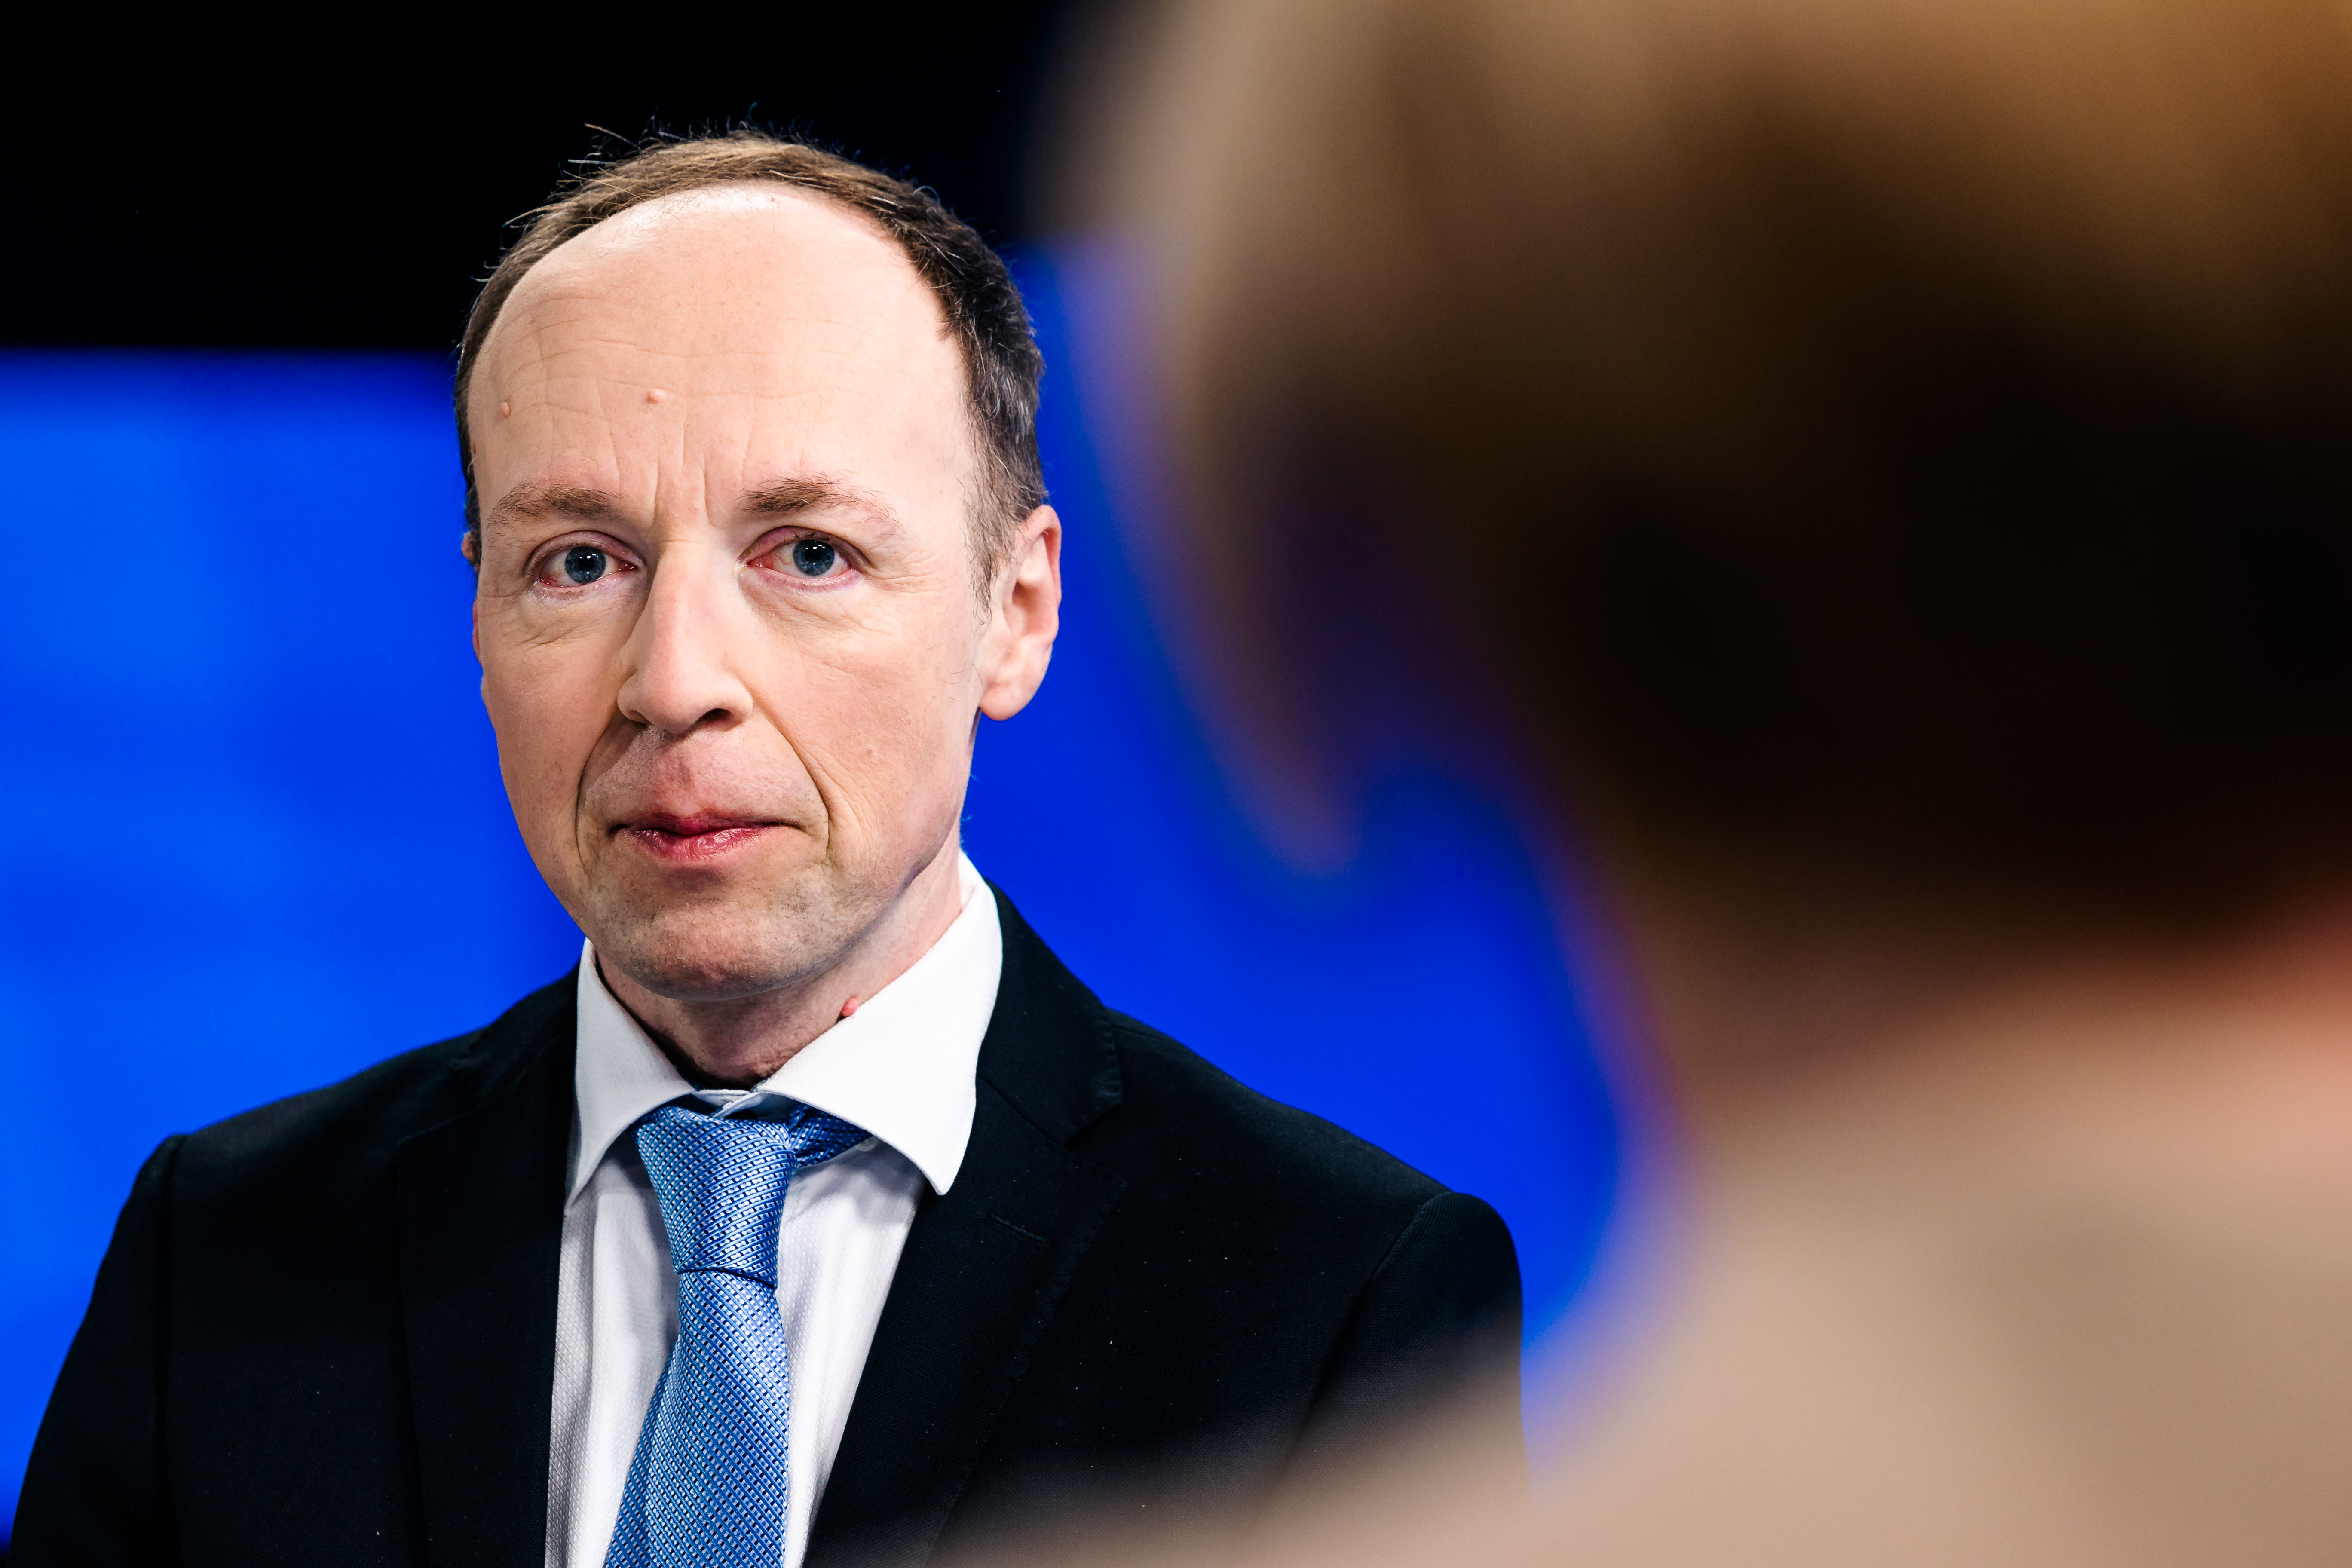 Sanctions against Western Russia could harm Finland, Halla-aho says